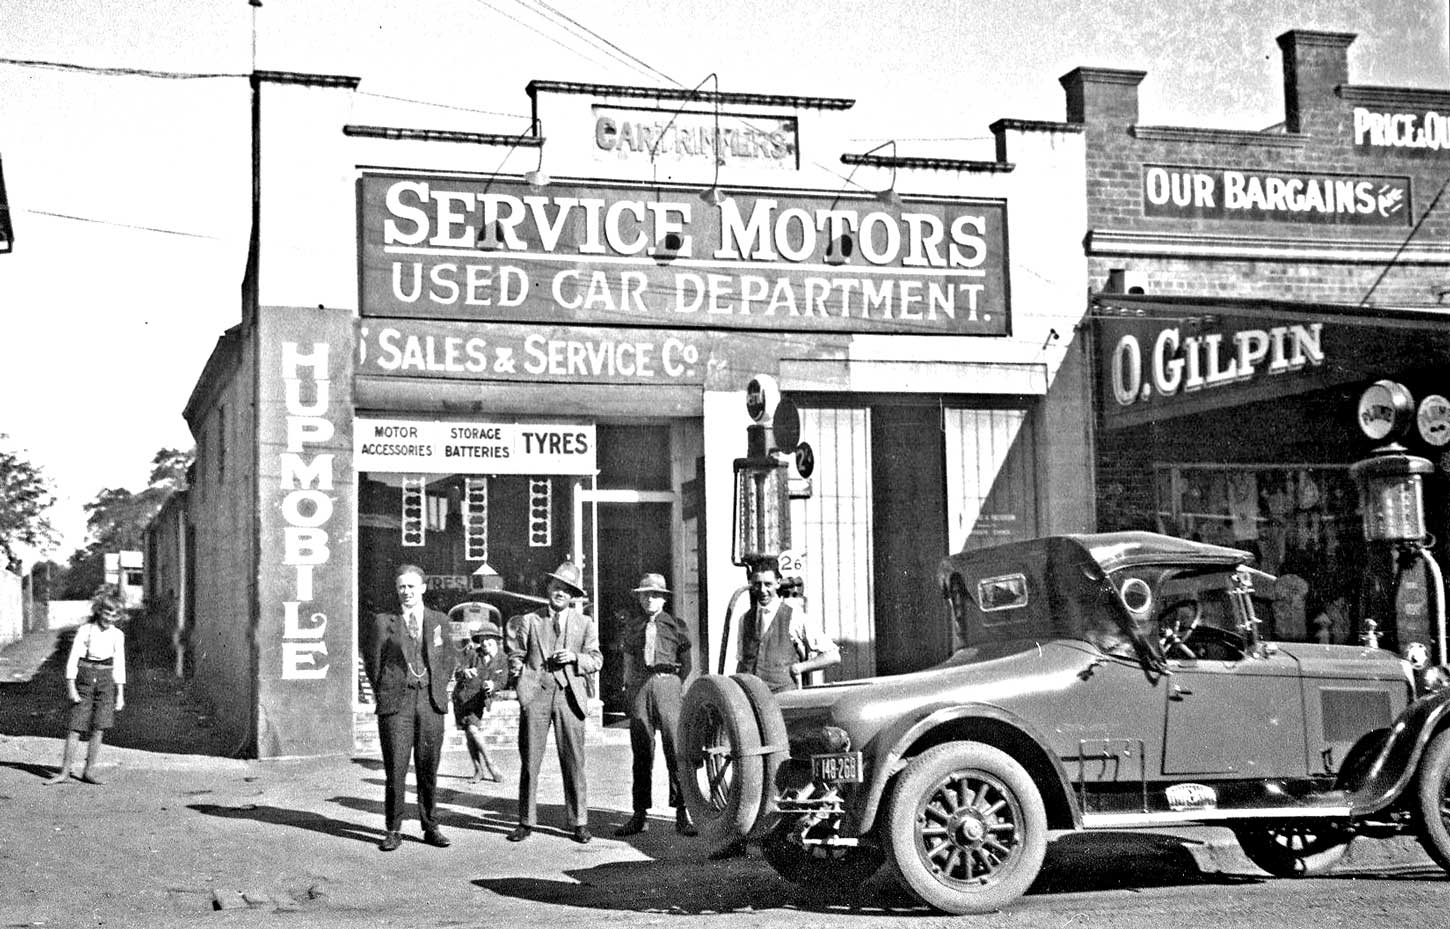 1920s-Hupmobile-Car-Dealership-and-Service-Co.-with-Gasoline-Station-1.jpg